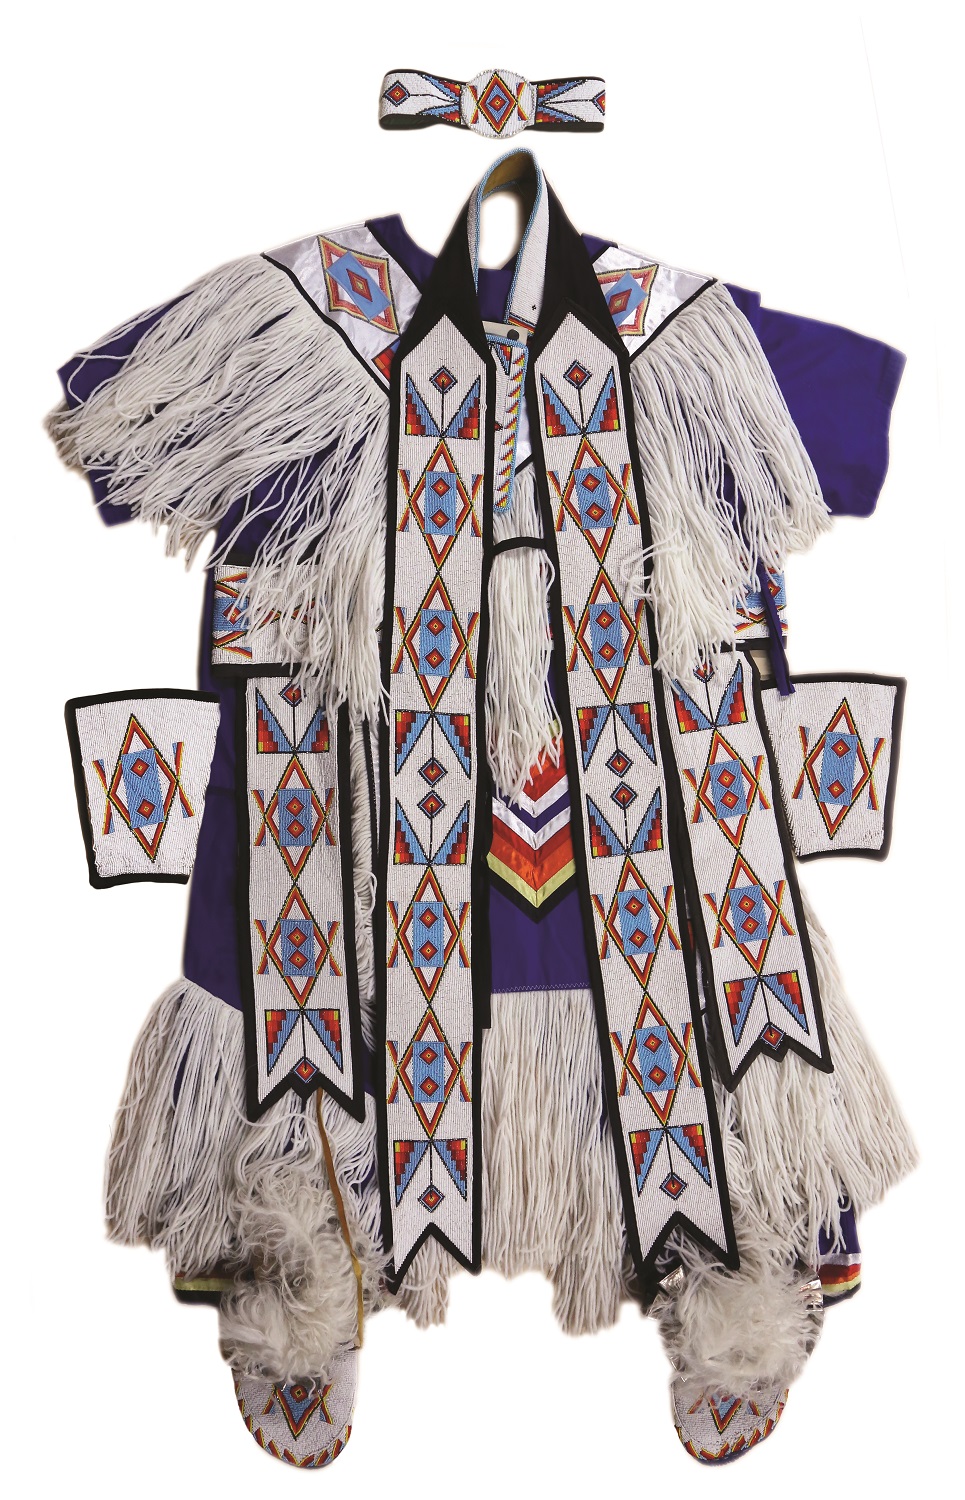 Picture of a grass dance regalia from the Whitefish River First Nation